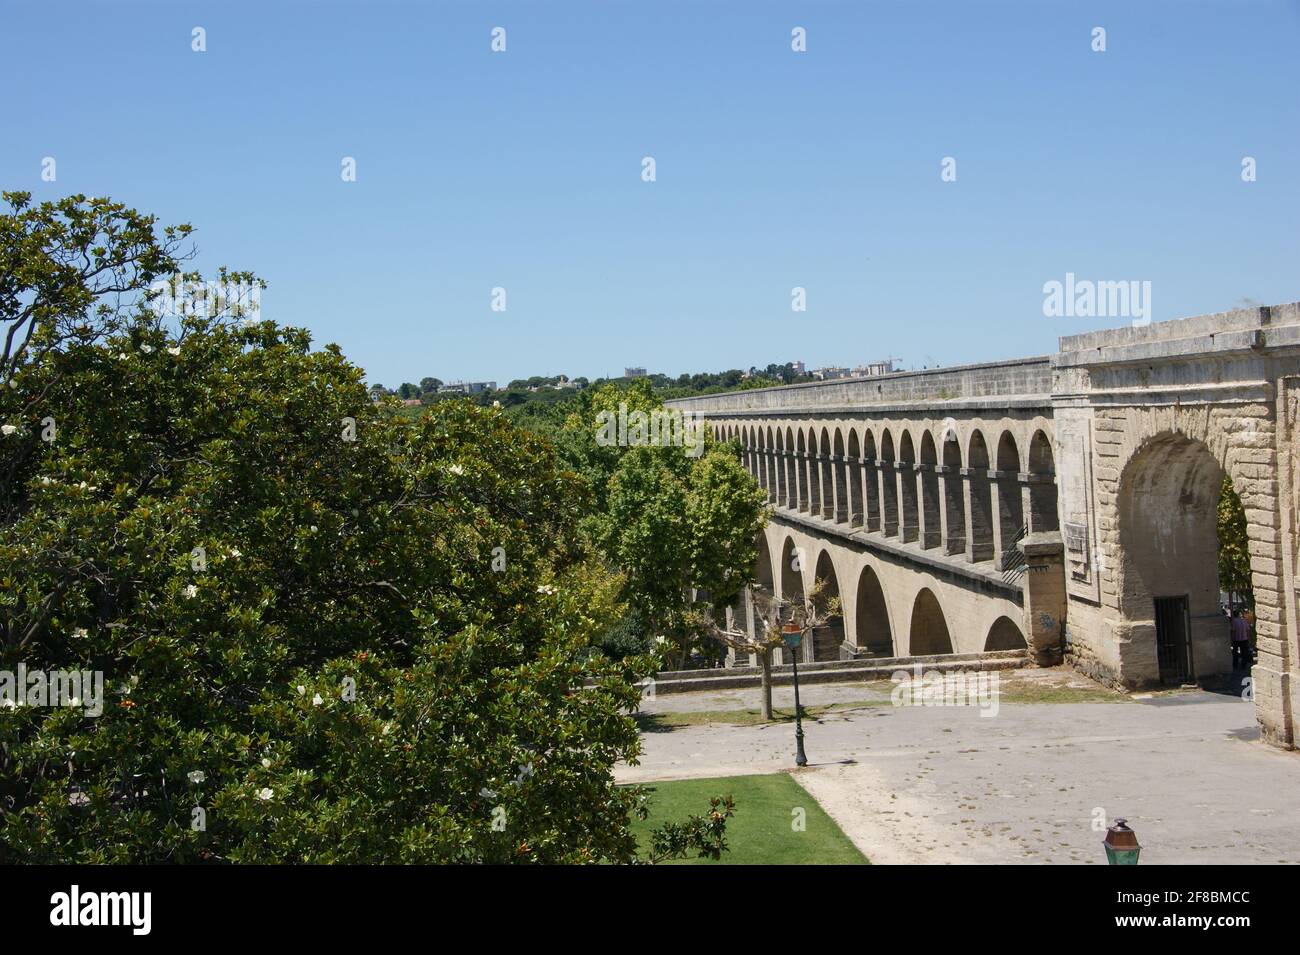 Aqueduct Saint Clement’s 53 big arches 8metres wide and 183 small arches of 2.78metres supply Montpeller with water for her many fountains. Stock Photo